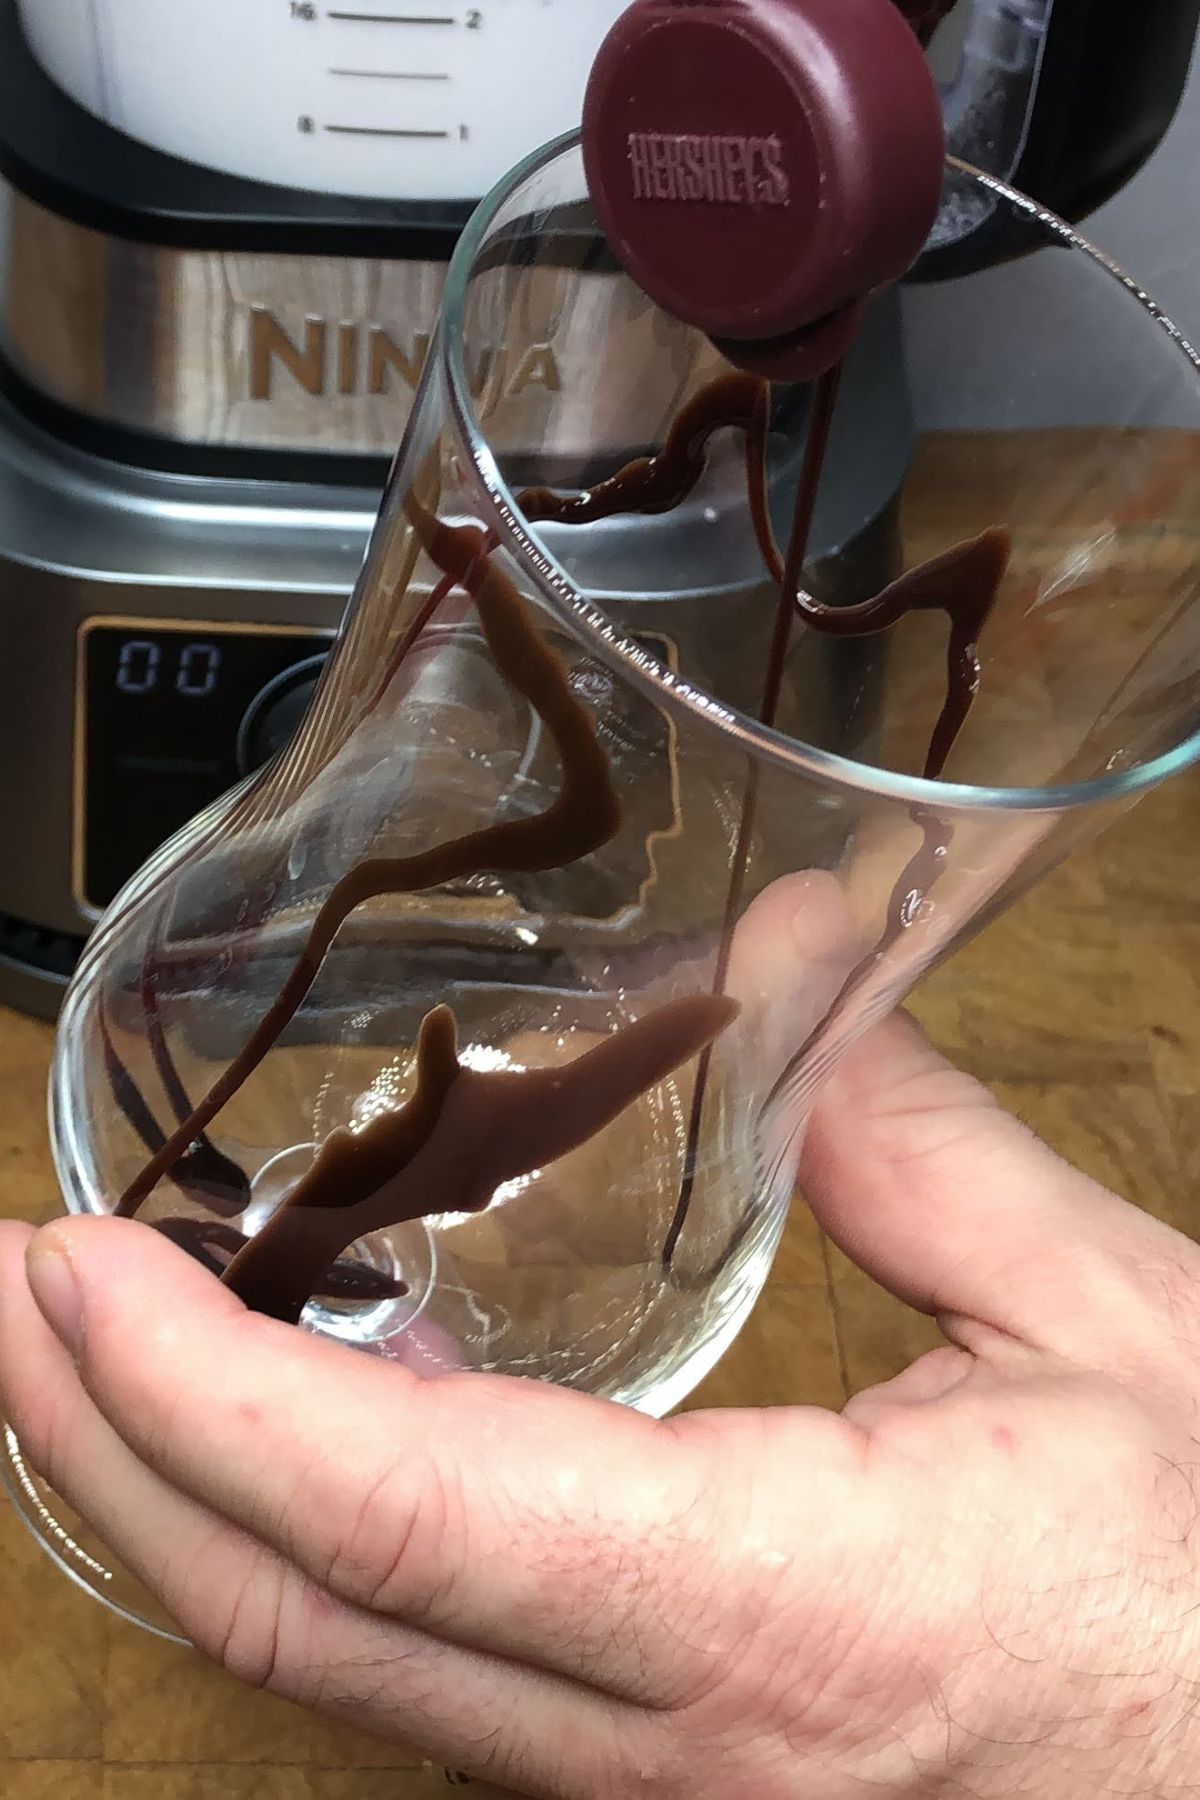 Drizzling chocolate syrup into a hurricane glass.